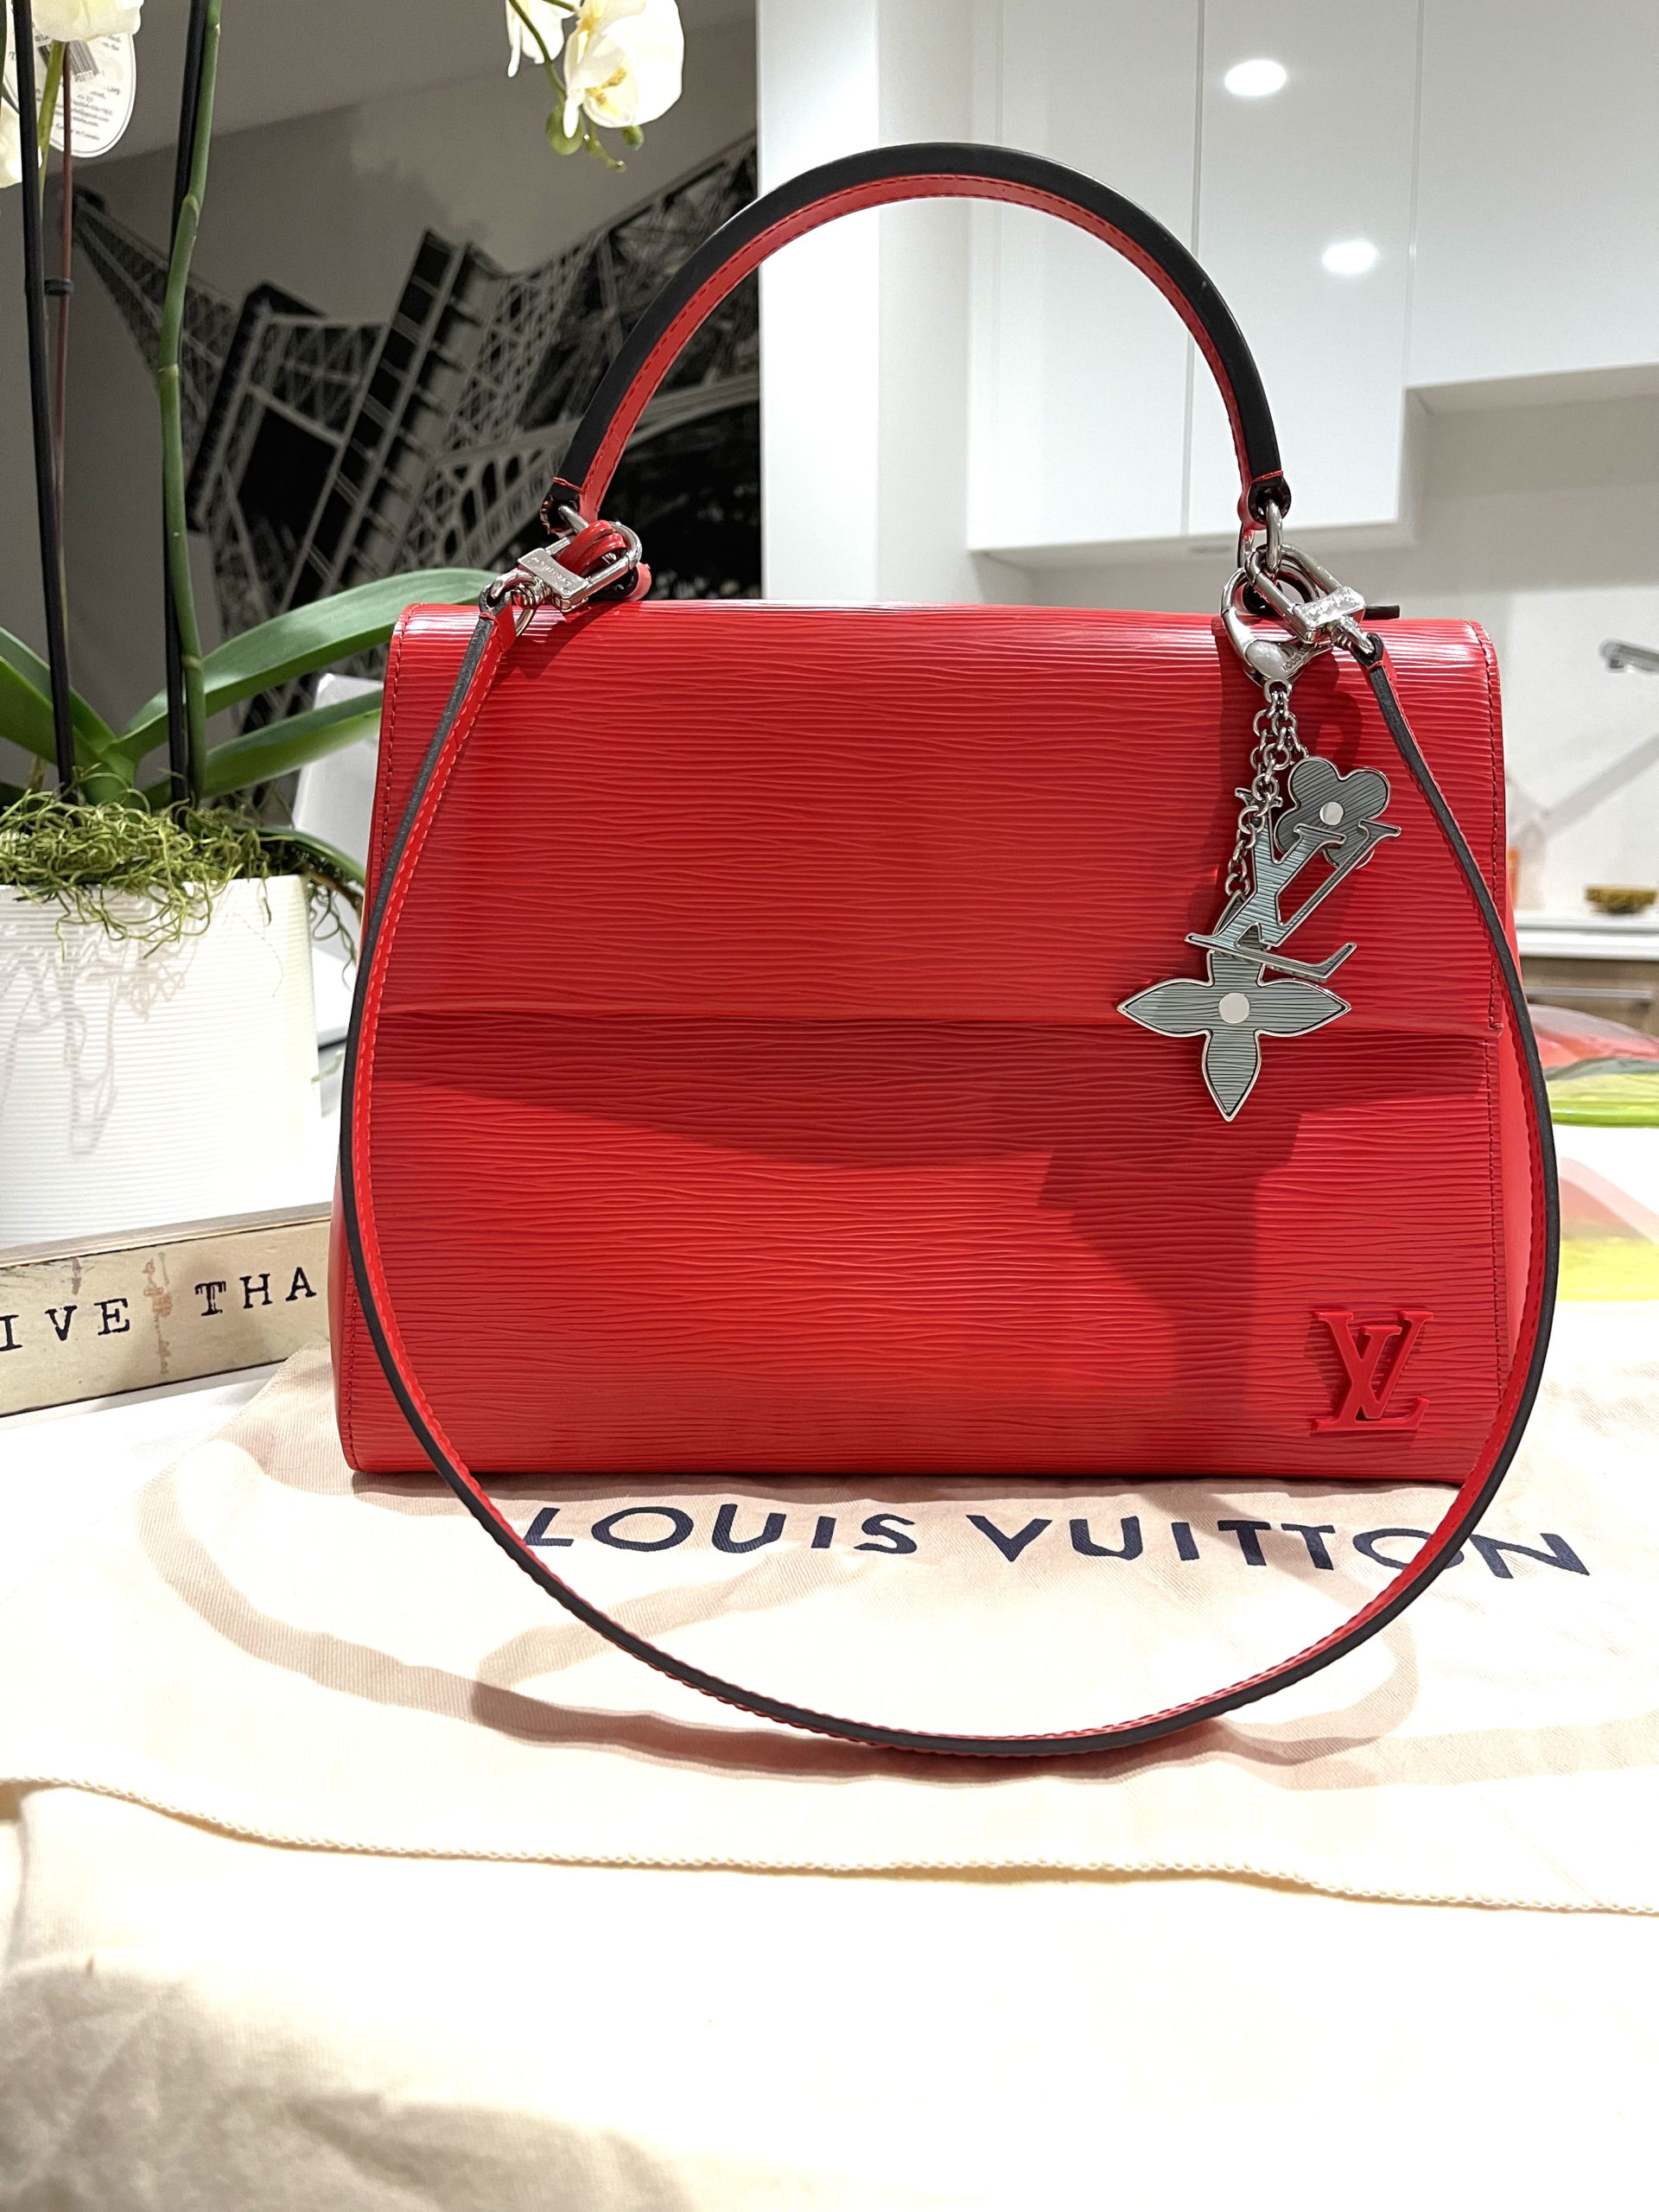 Louis Vuitton Cluny mm in Red Handbag - Authentic Pre-Owned Designer Handbags